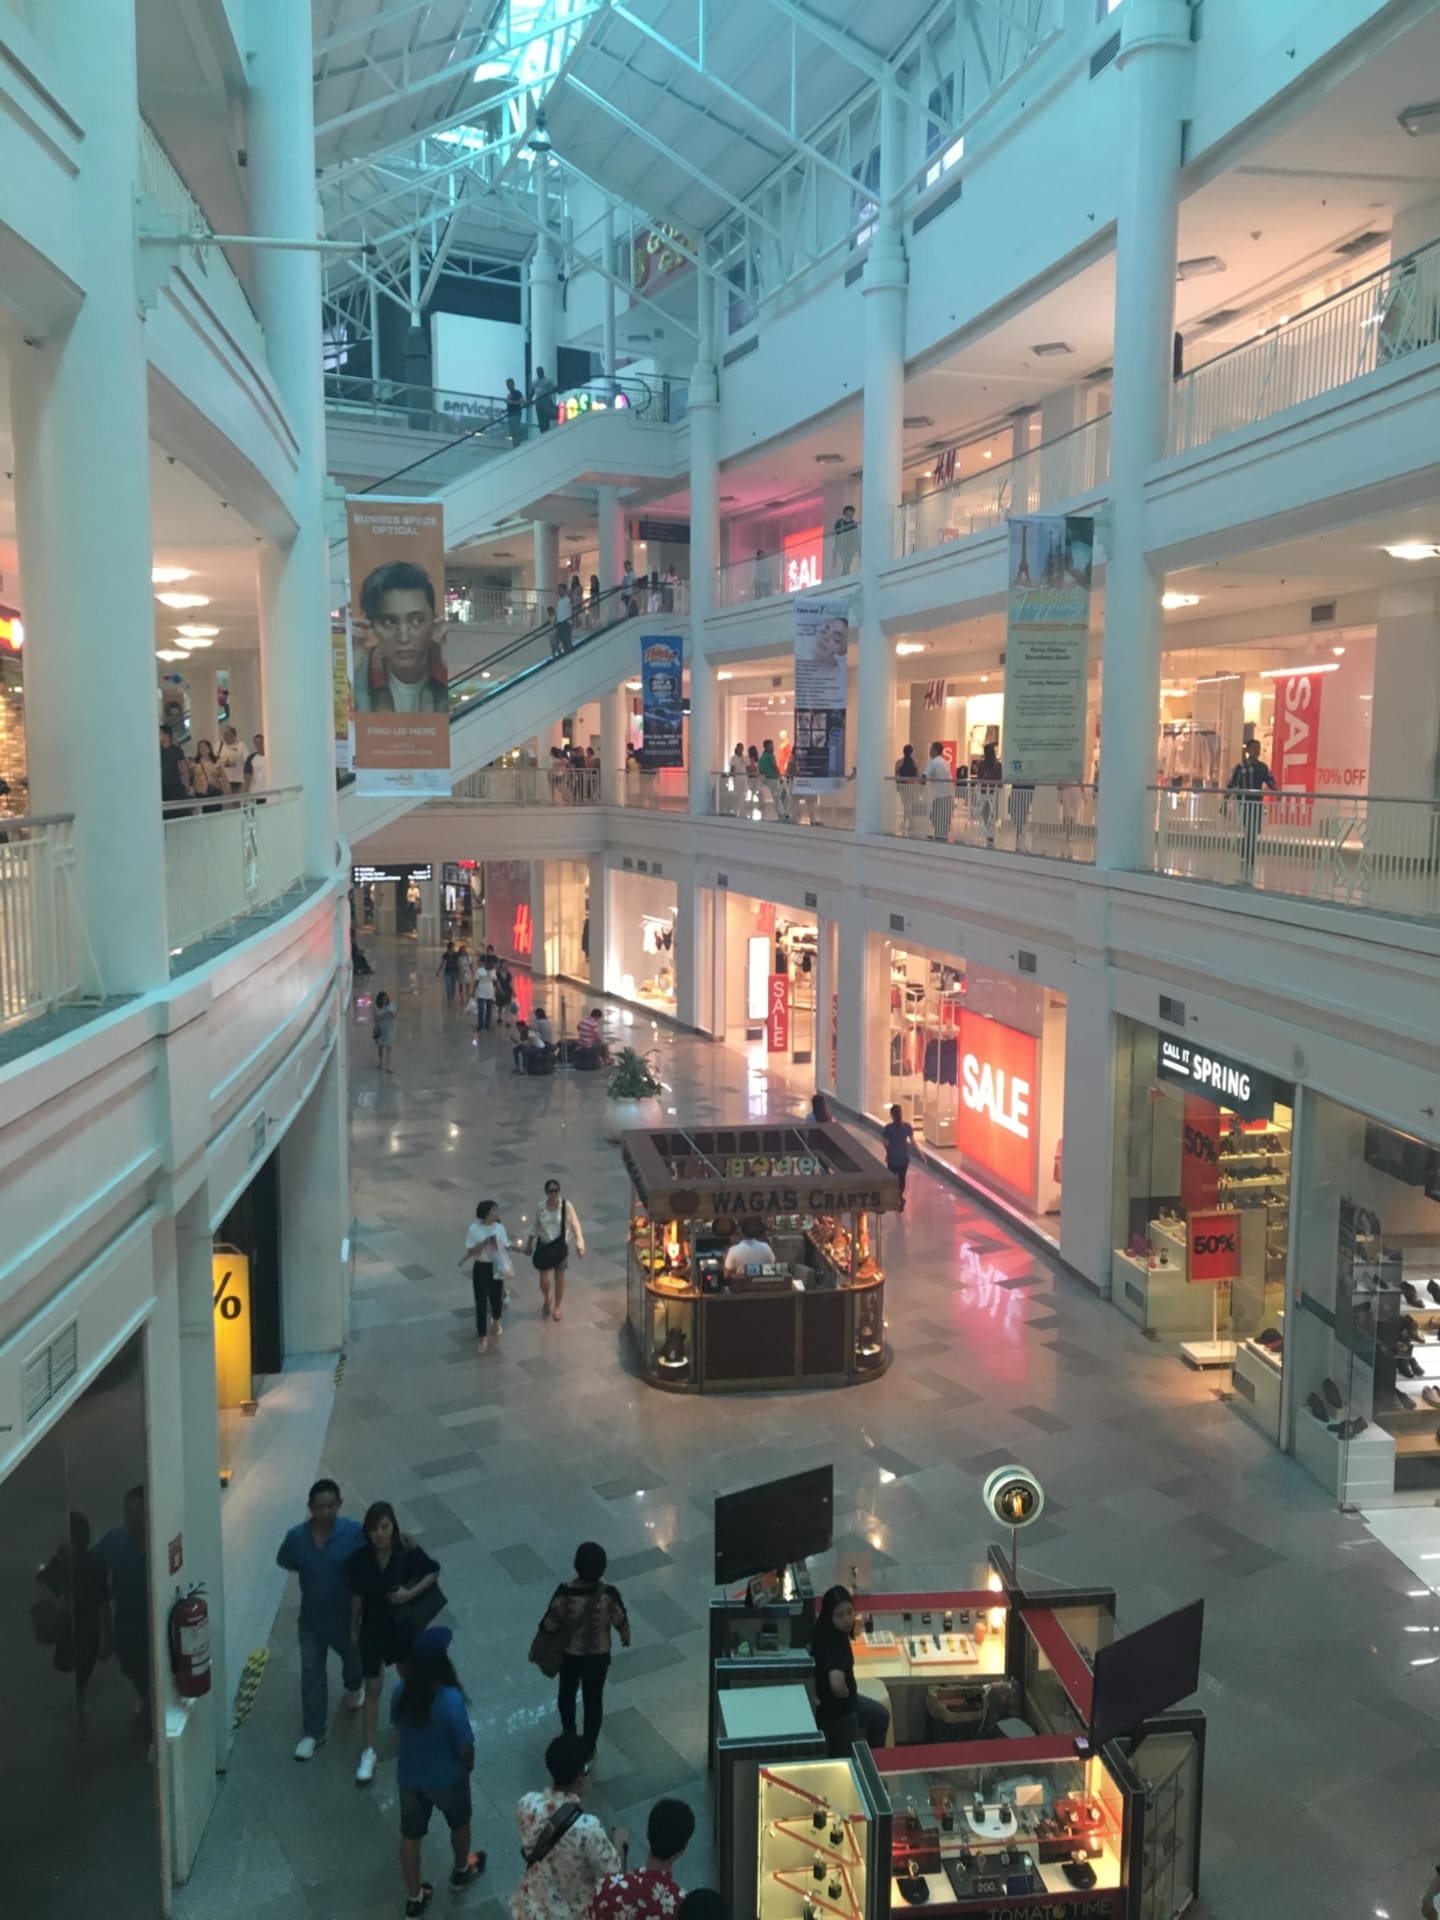 A popular, modern shopping centre situated in Cebu, visited by many its citizens daily. Photo: Aideen McAuley